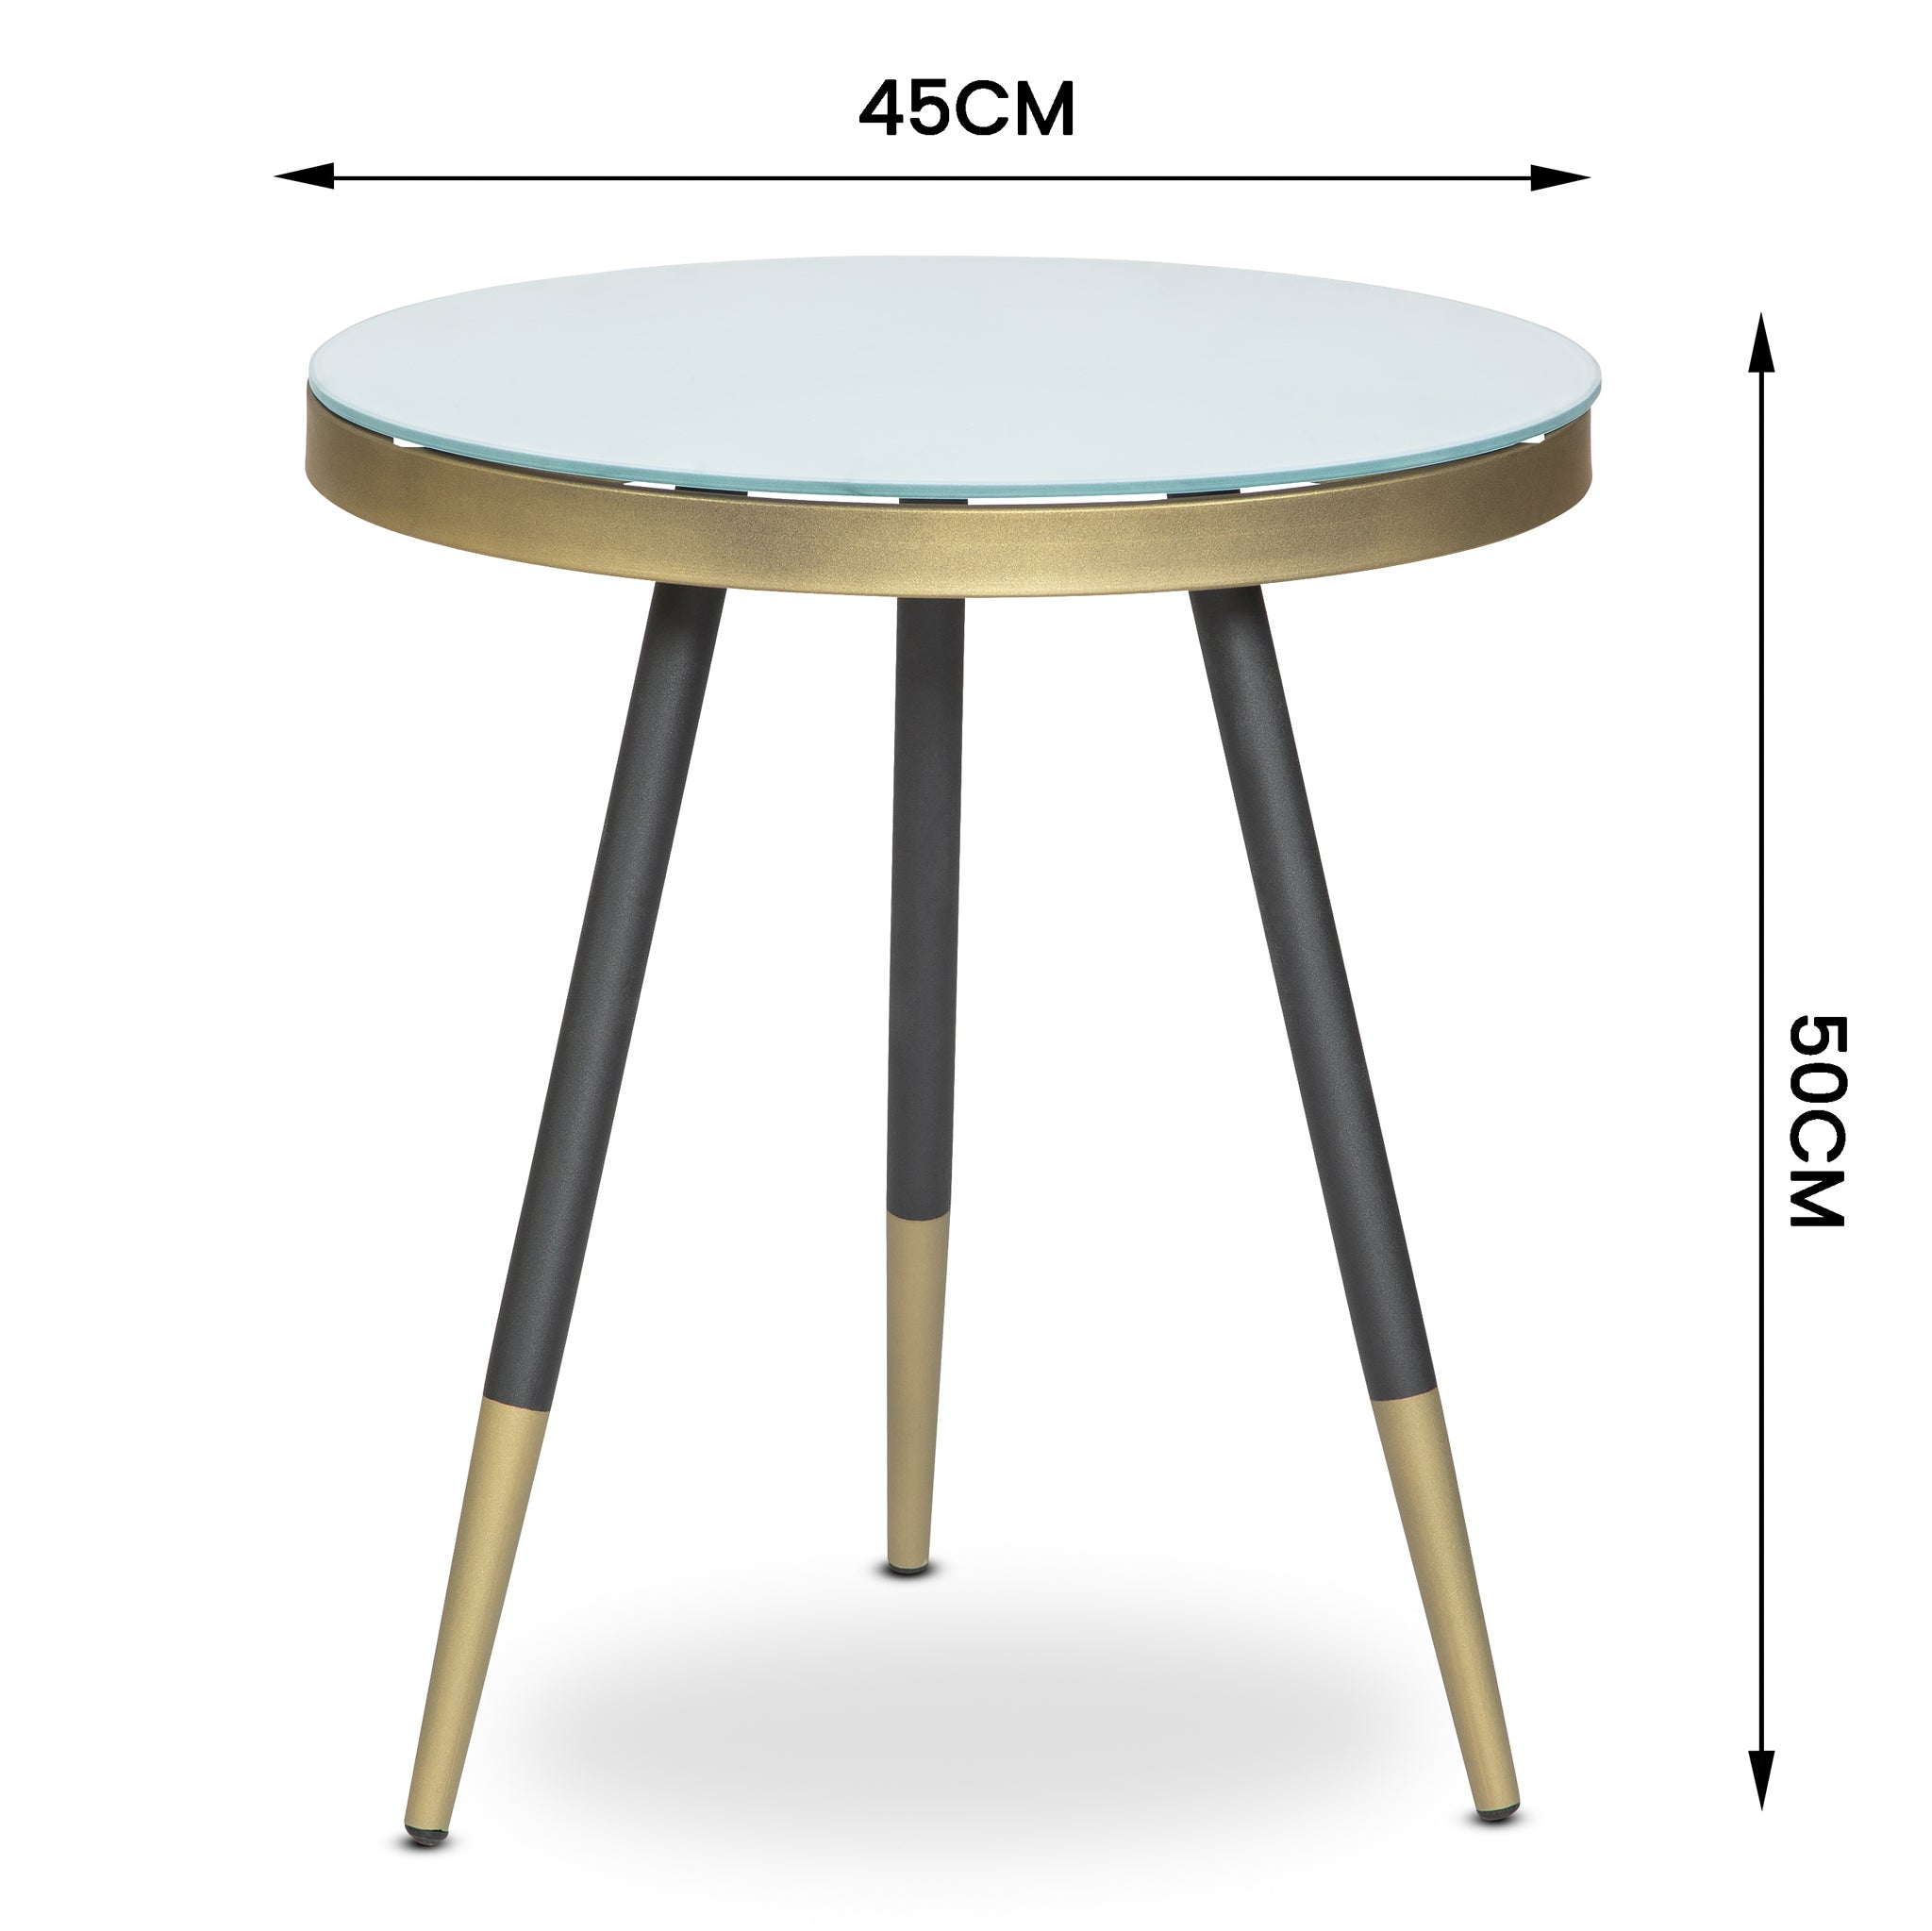 Marble Effect Side Table With Wooden Legs - 45 x 50cm